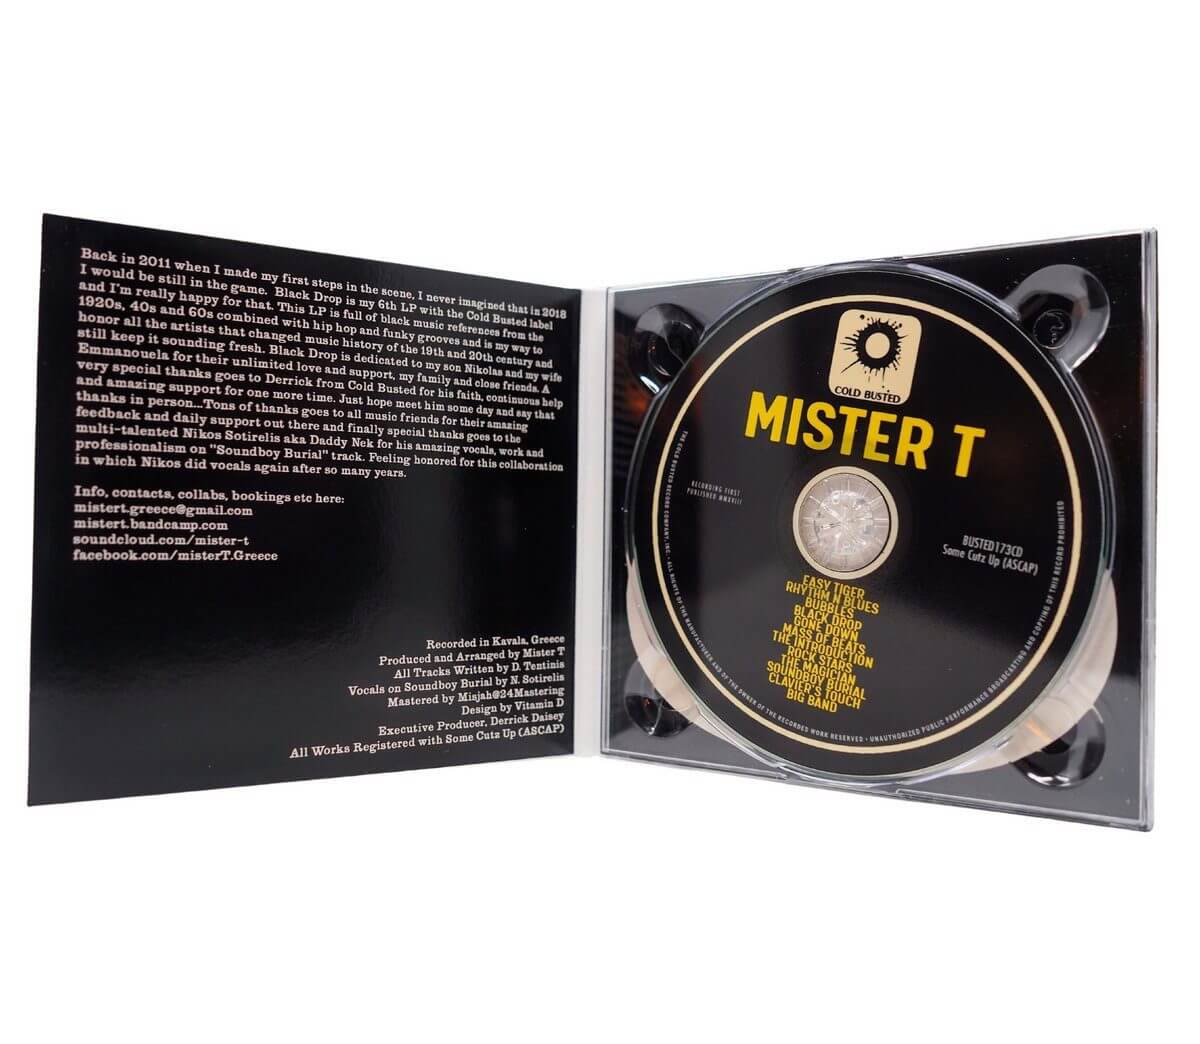 Mister T - Black Drop - Limited Edition Compact Disc - Cold Busted